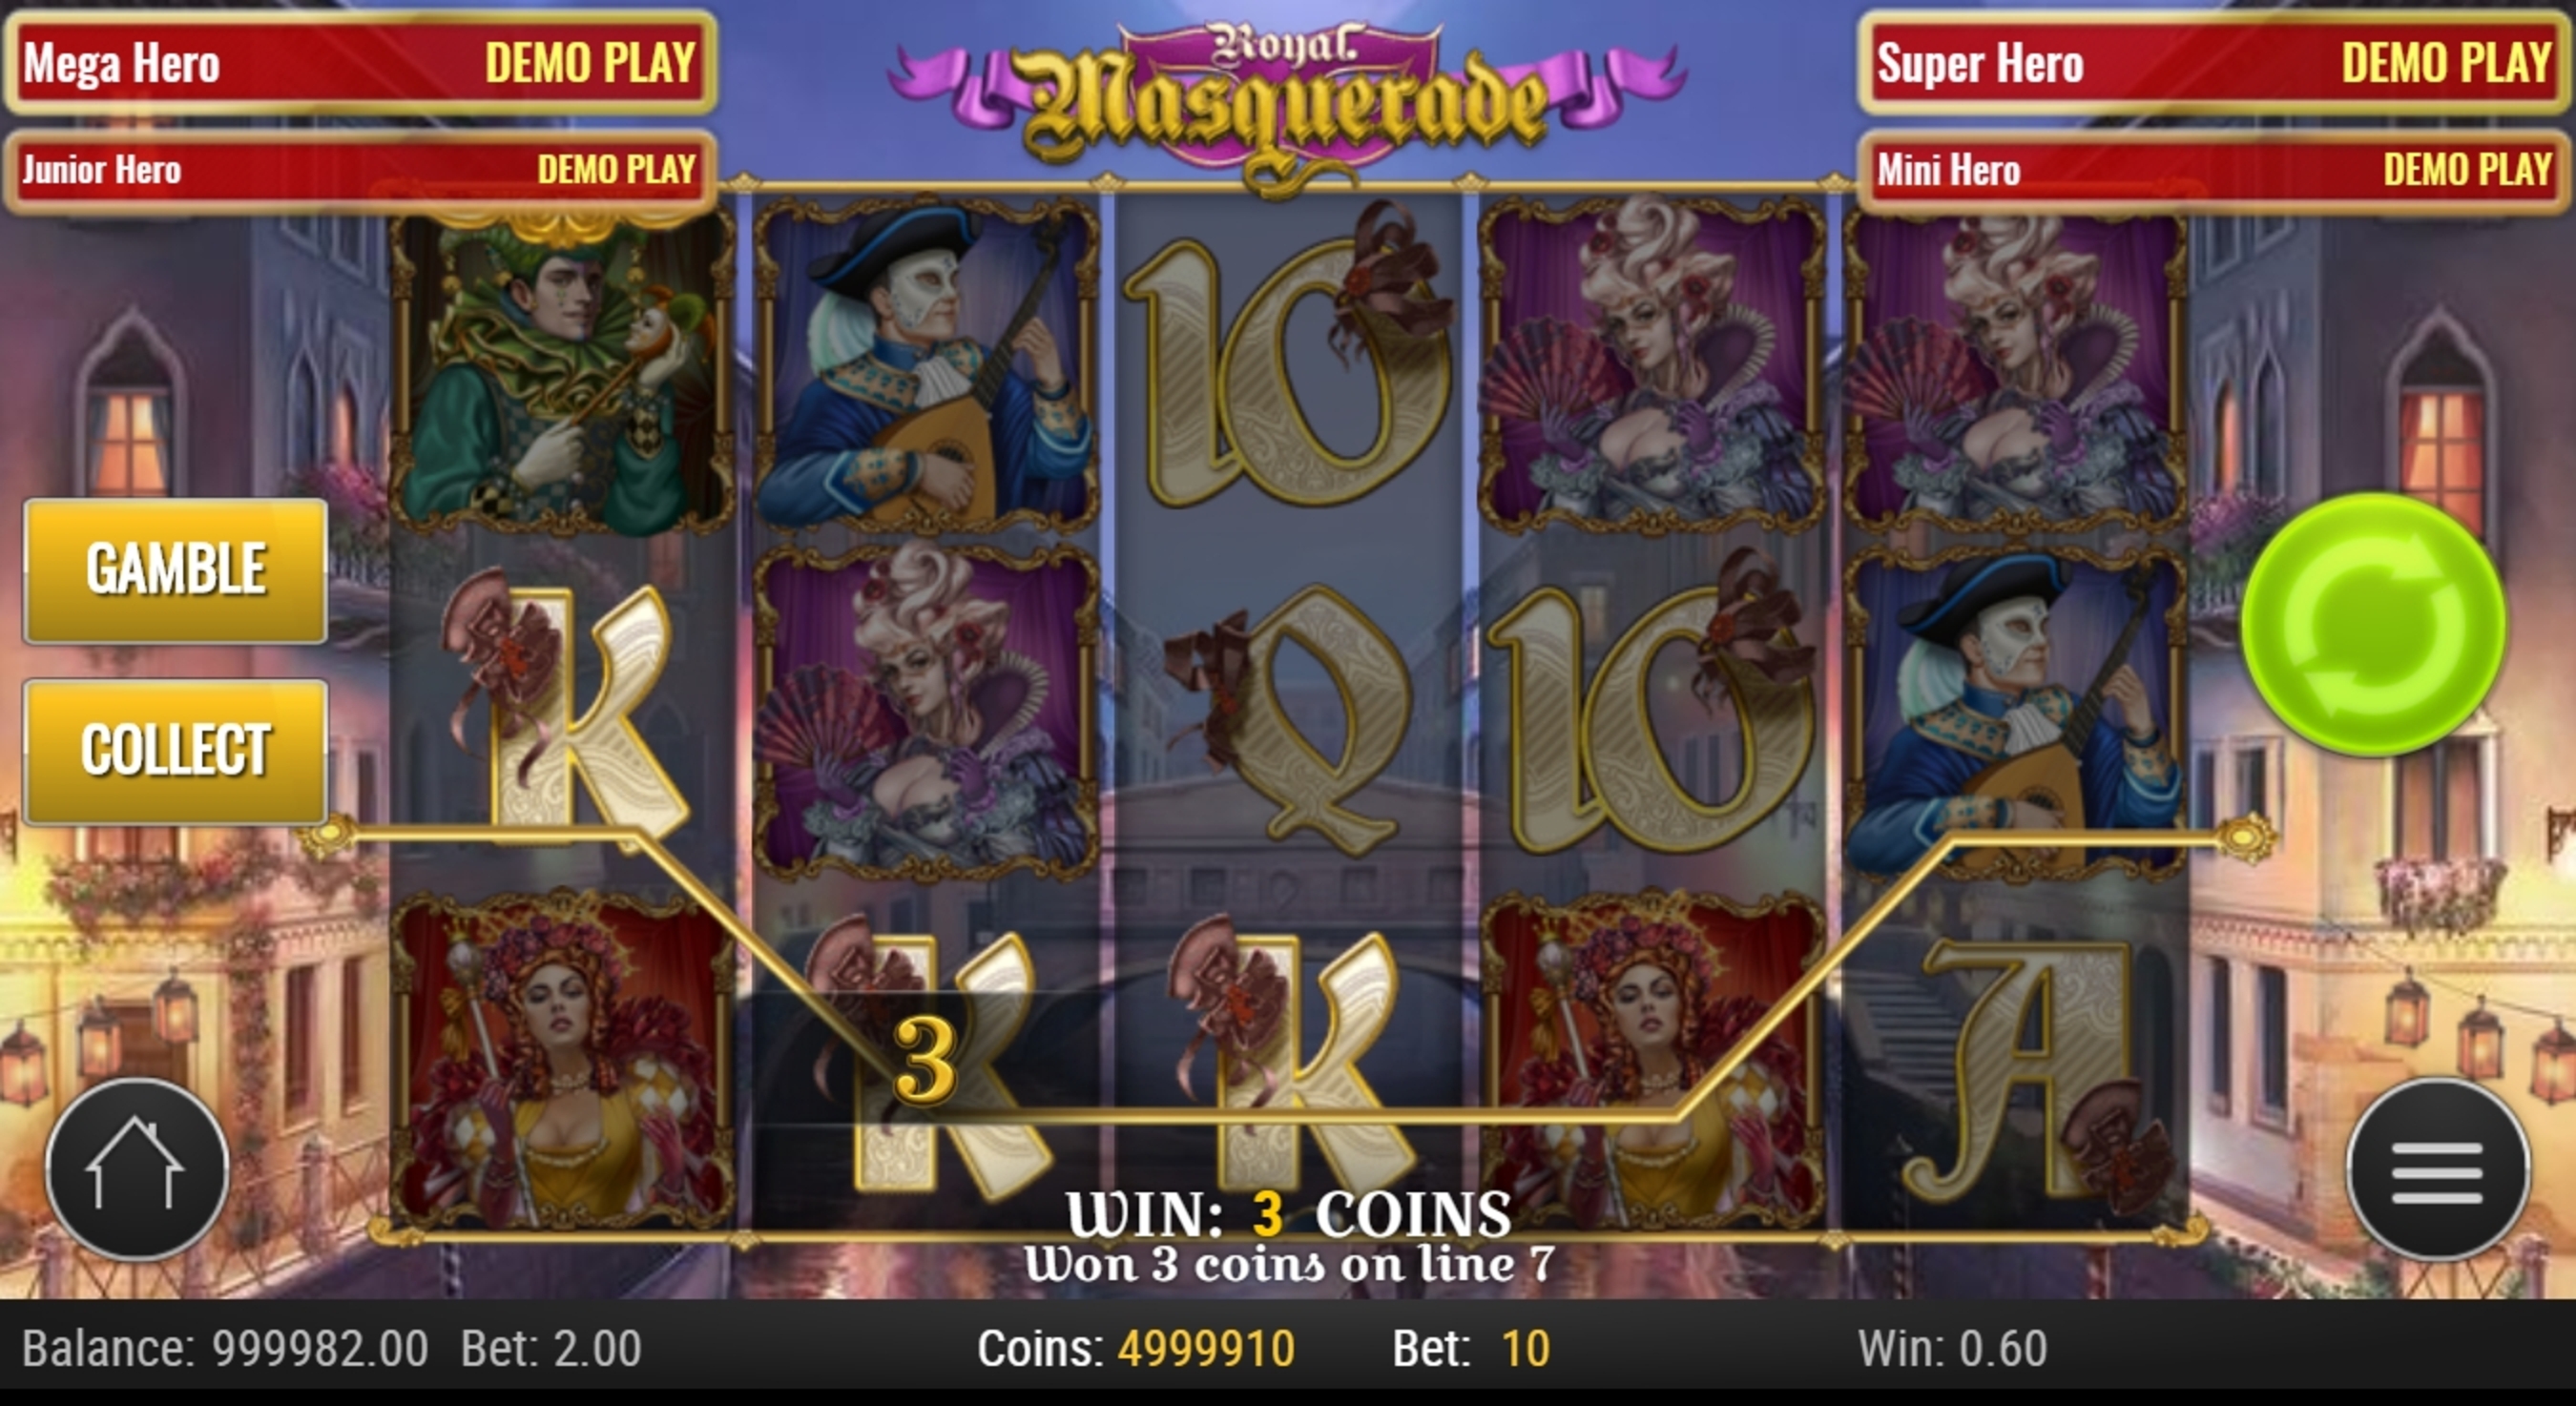 Win Money in Royal Masquerade Free Slot Game by Playn GO